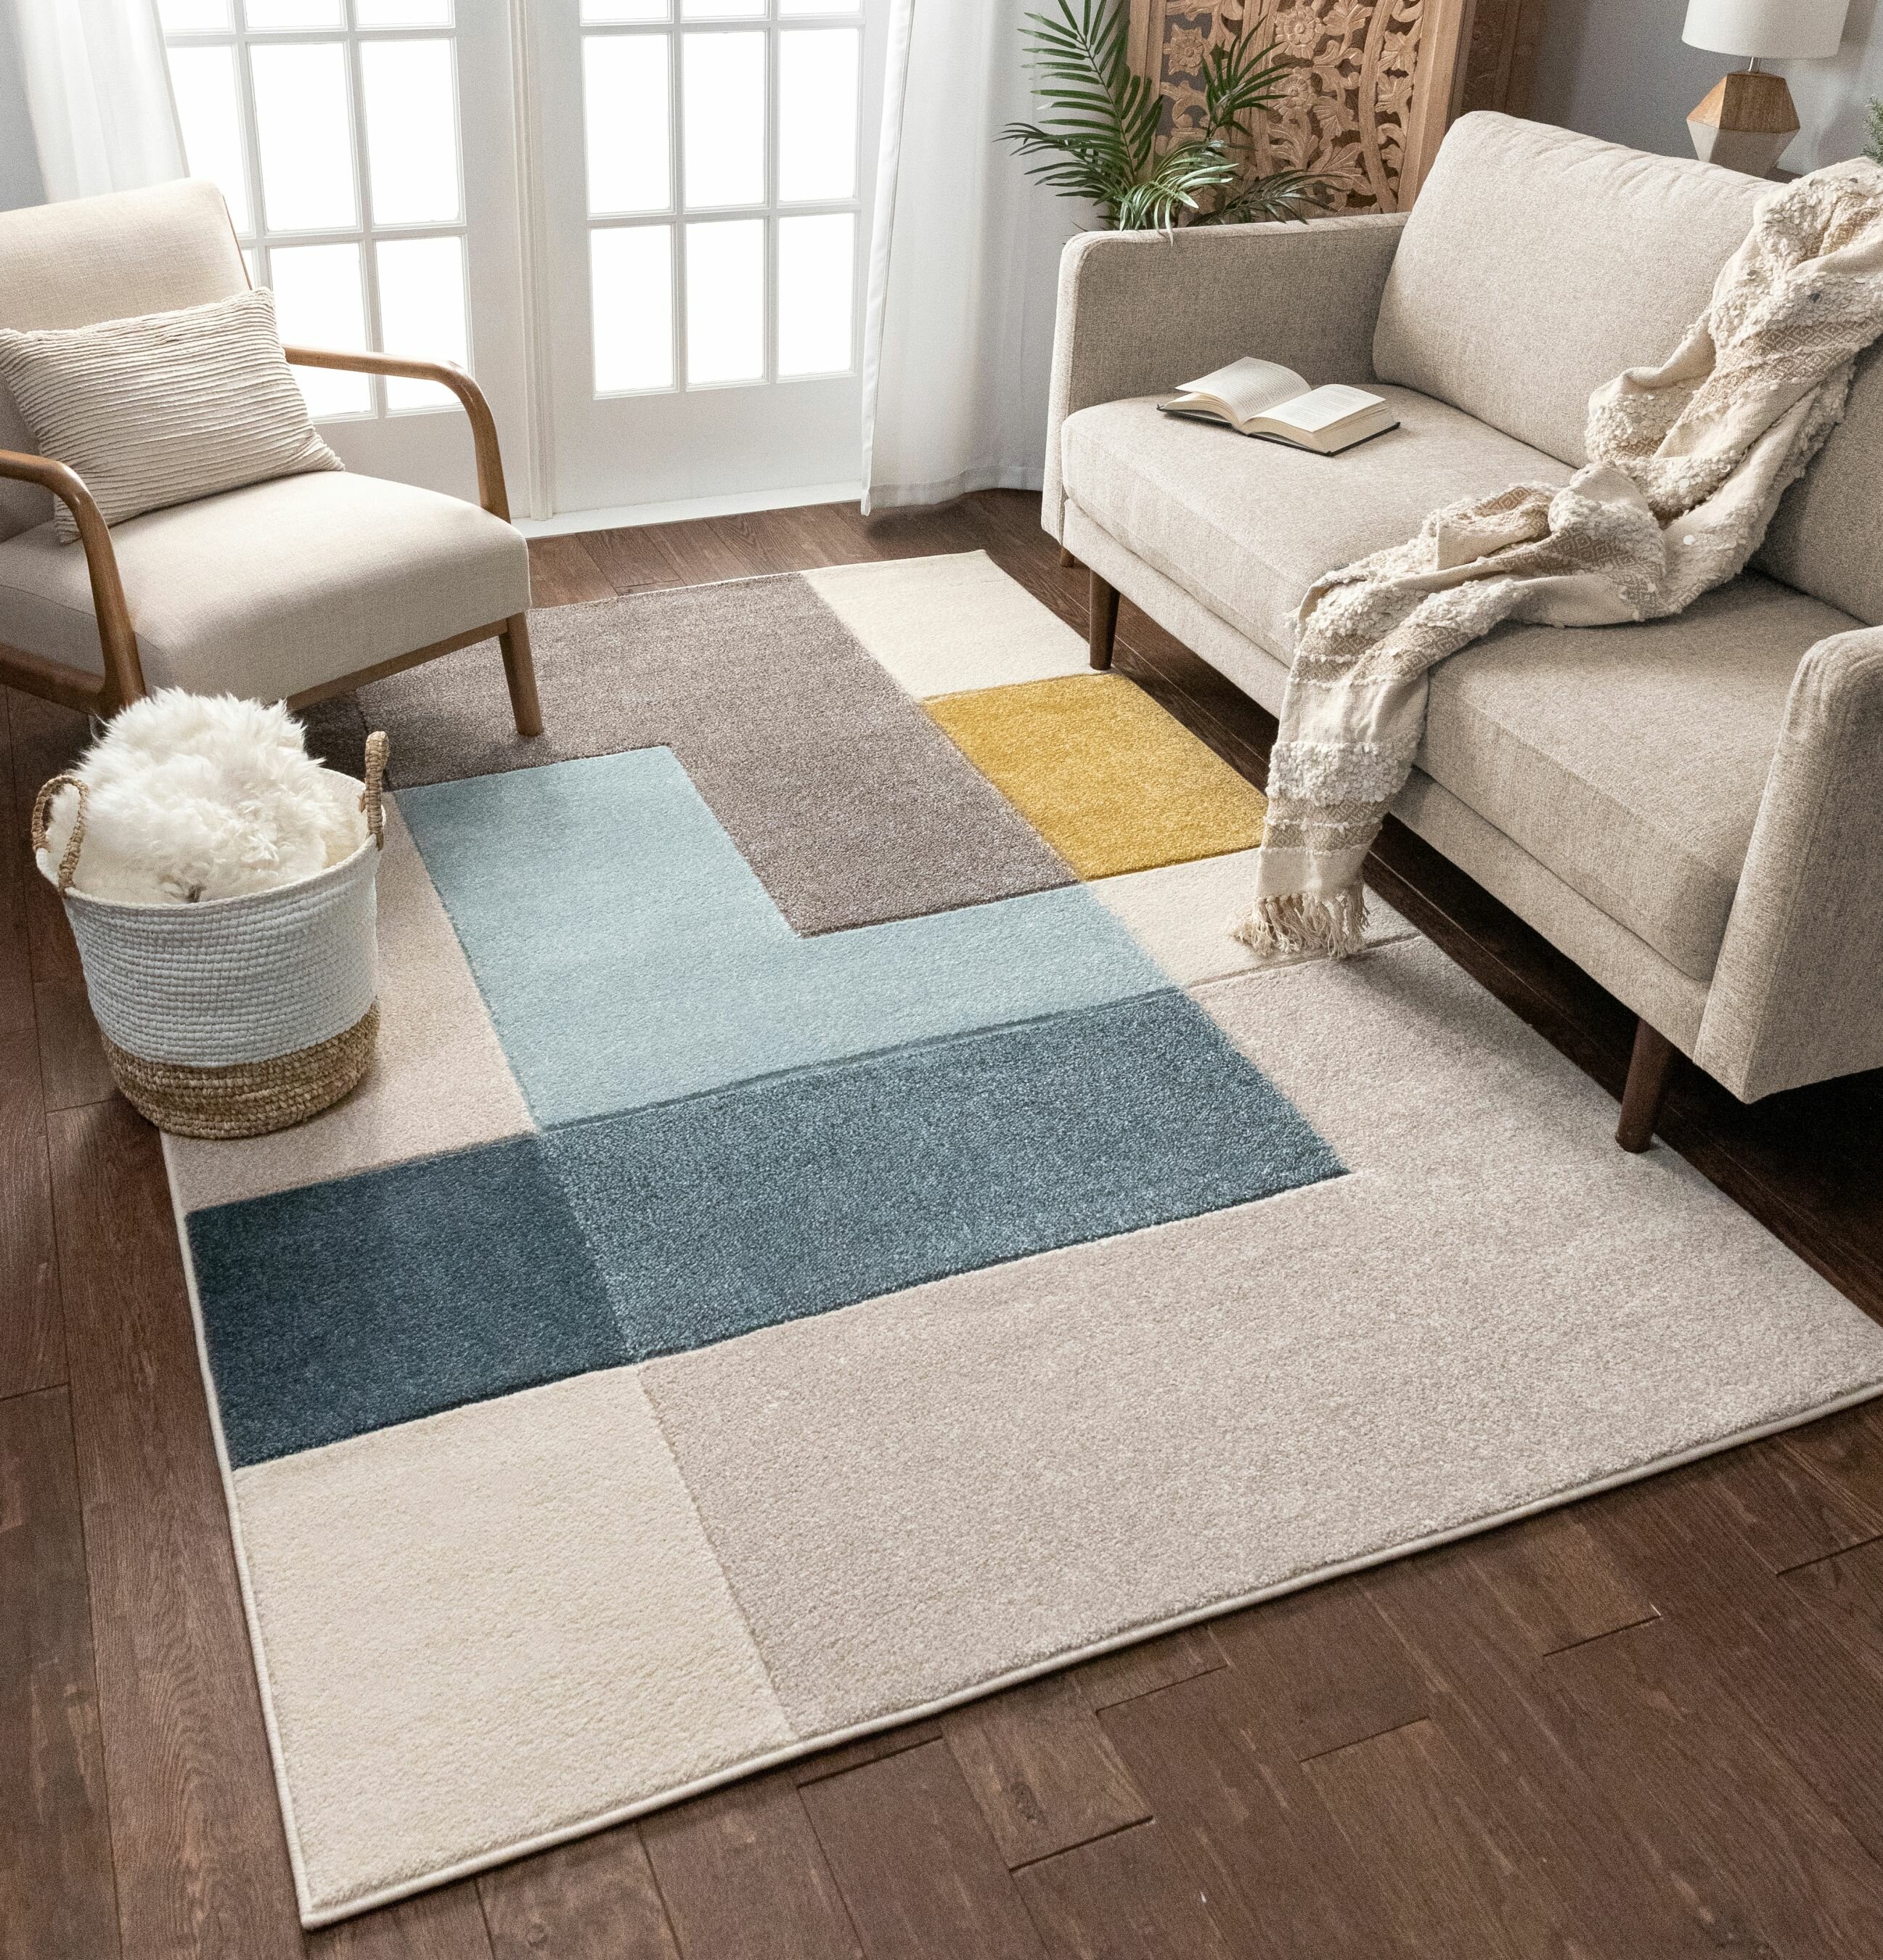 Mustard Modern Style Rugs Home Accessories in Geometric Grey Cream Grey & Mustard, 120x170cm Diamond Pattern in Soft Touch Large Living Room Rug Yellow